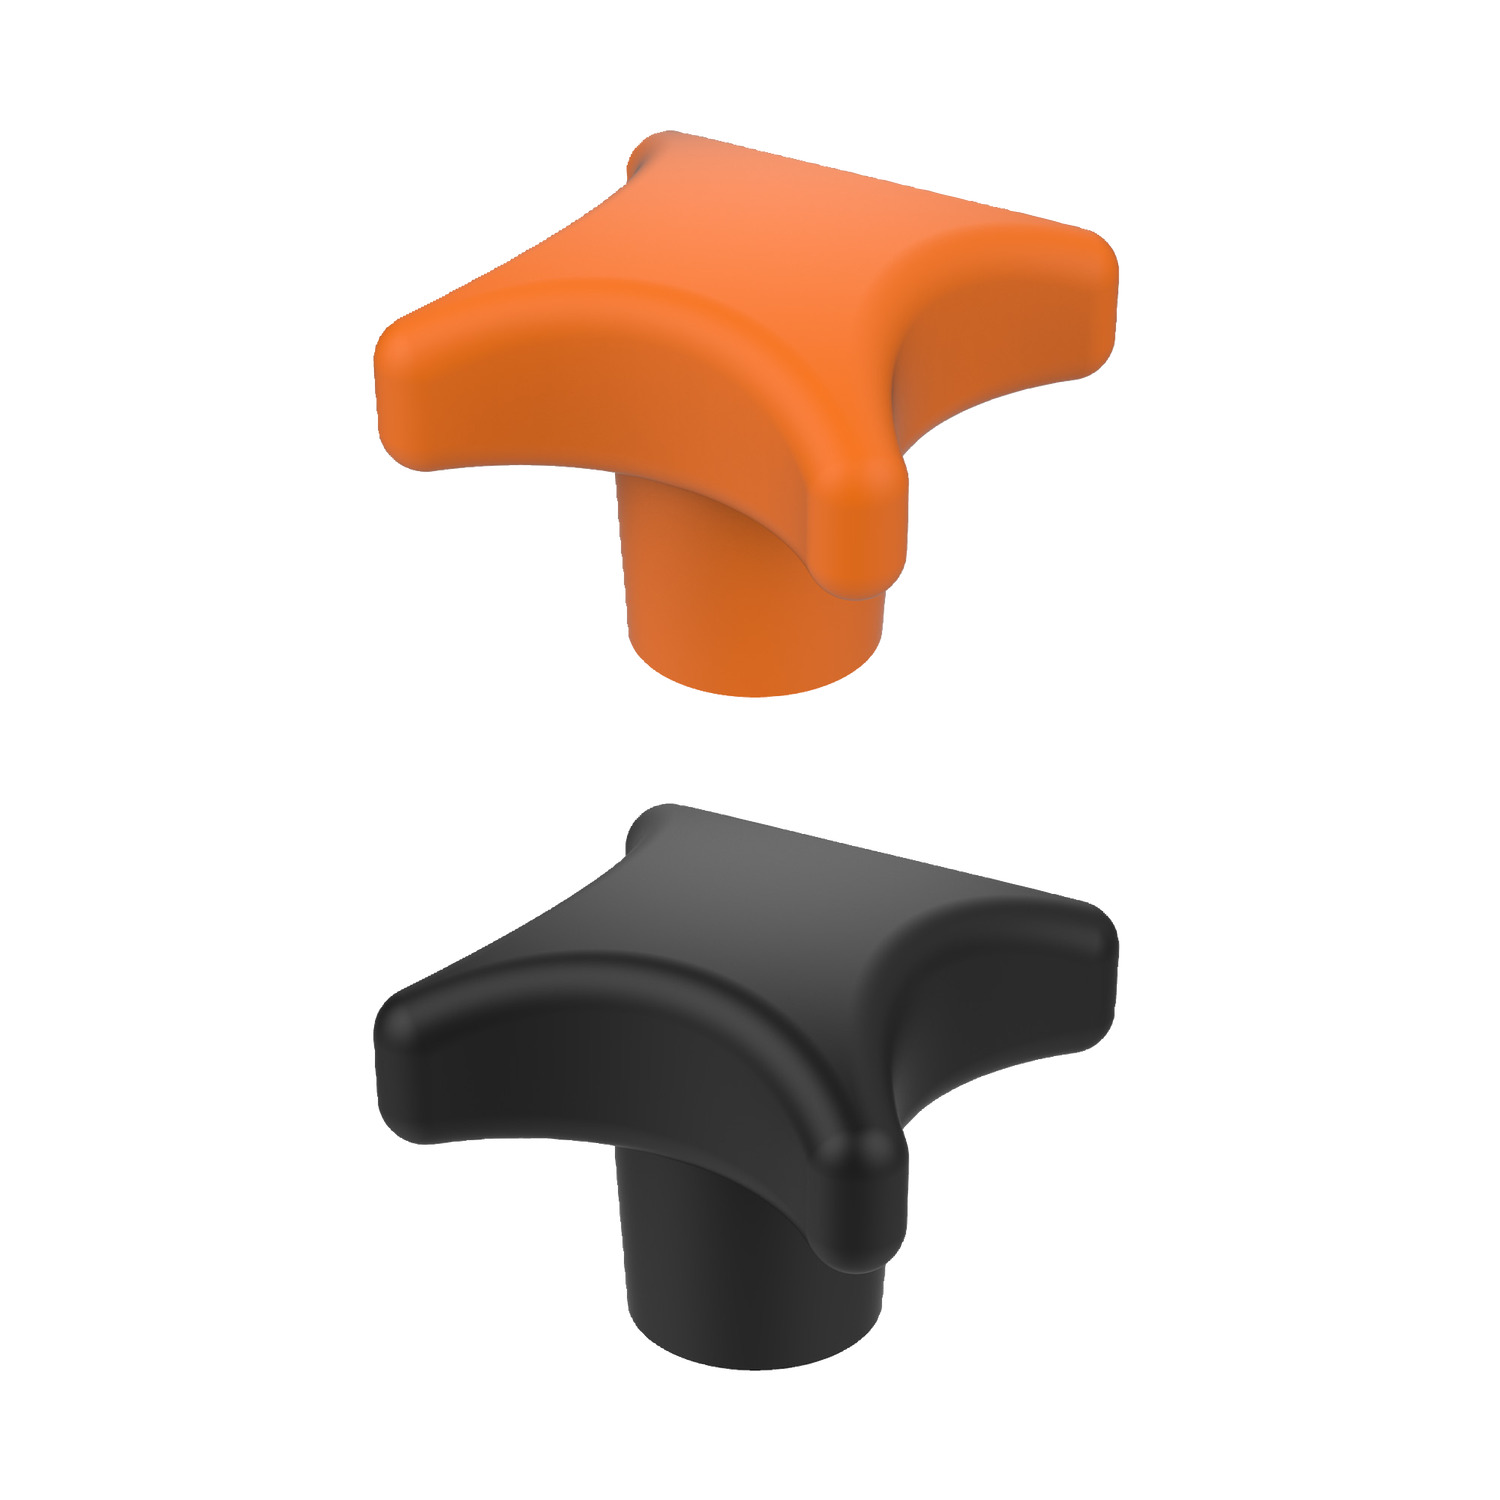 Palm Grips Cast iron plastic coated palm grips made to DIN 6335. Available in orange and black and in stock today.